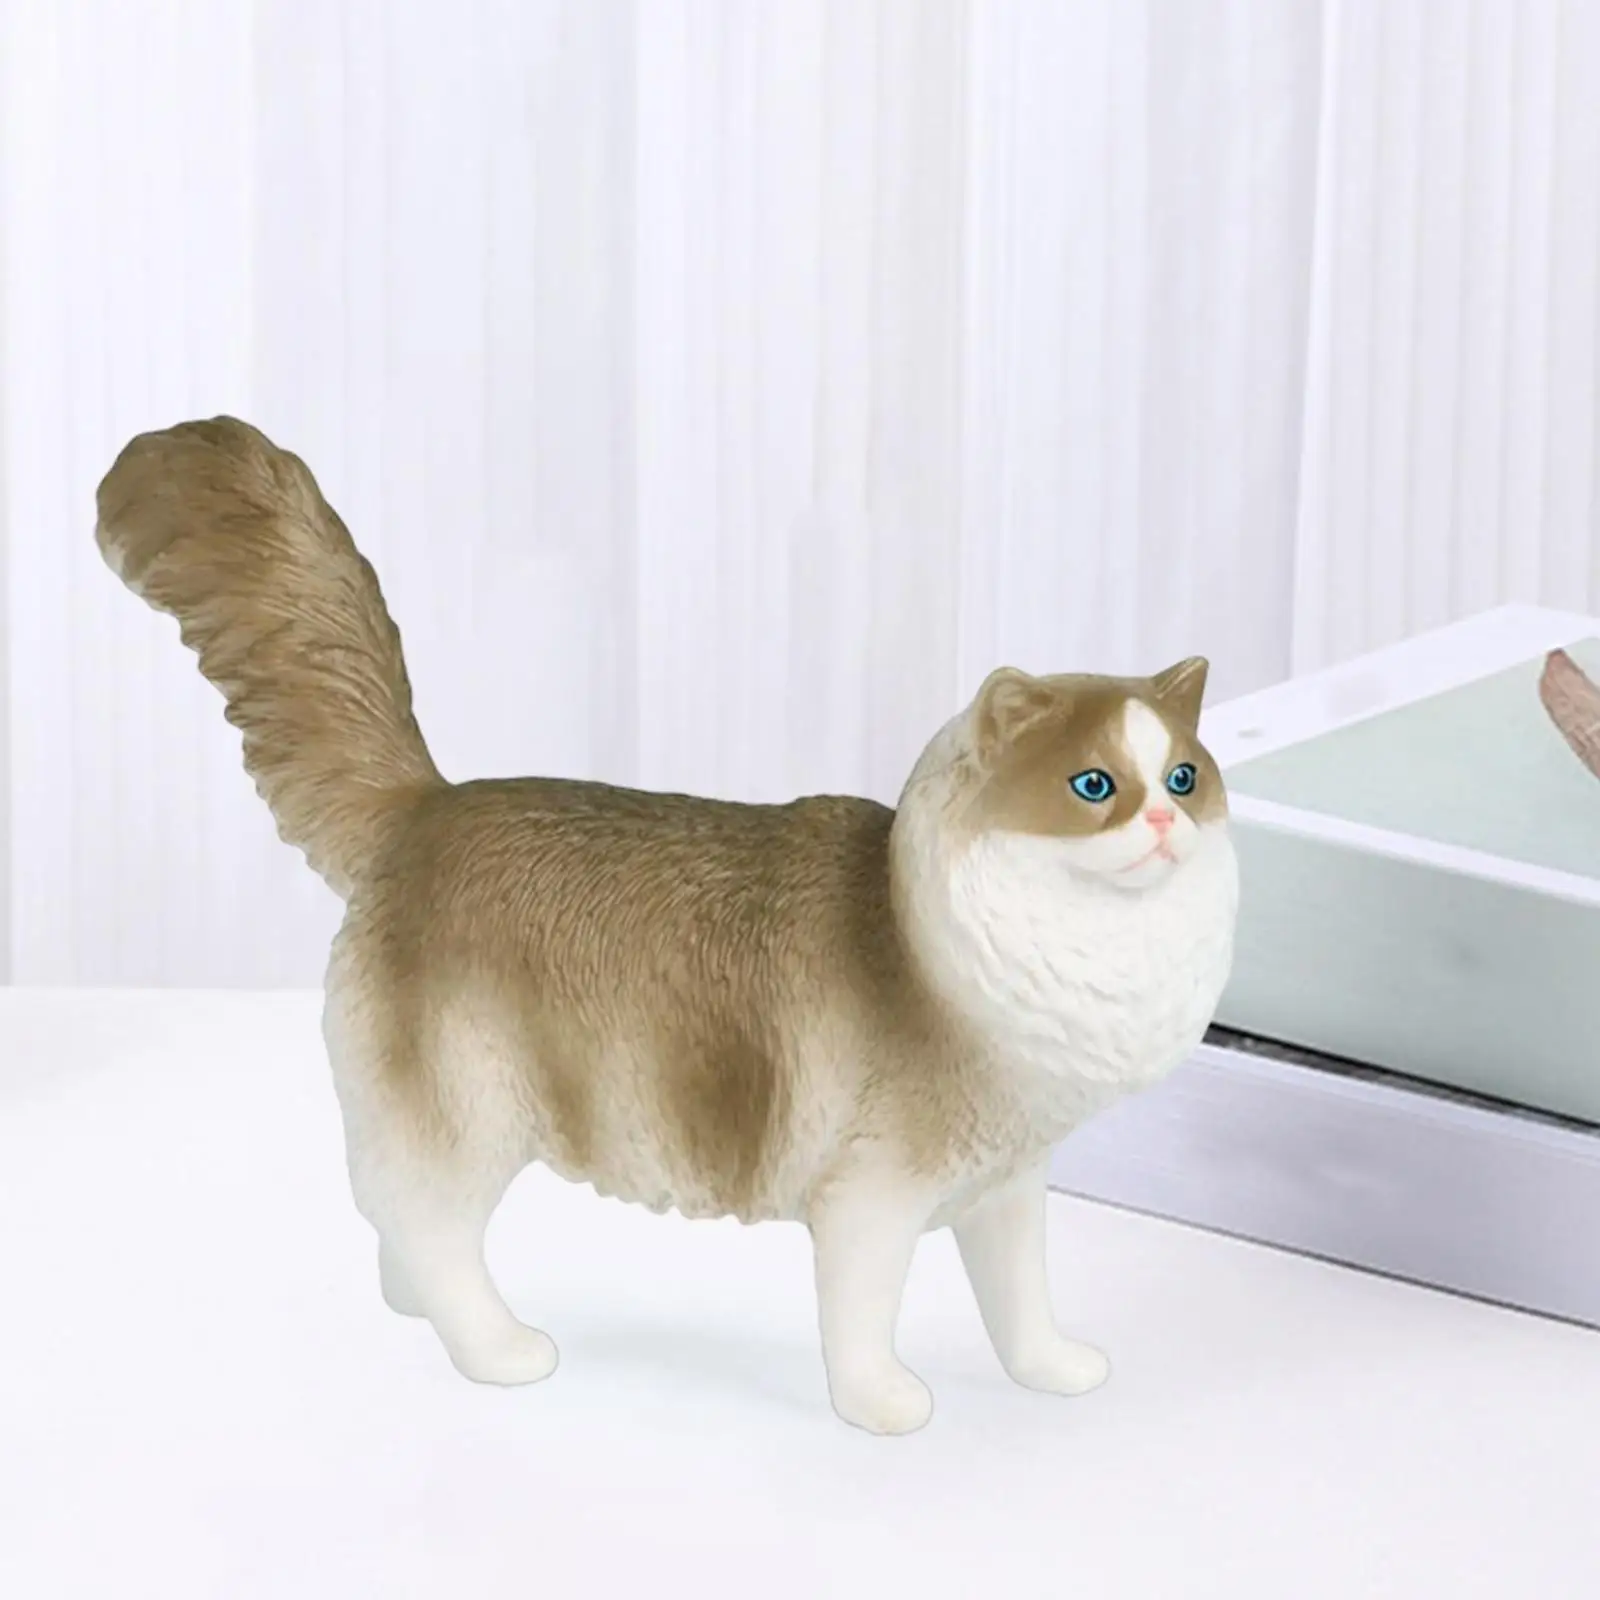 High Simulation Miniature Cat Figure Small Animals Figures Collection Playset Figurine for Decor Cake Topper Housewarming Gifts